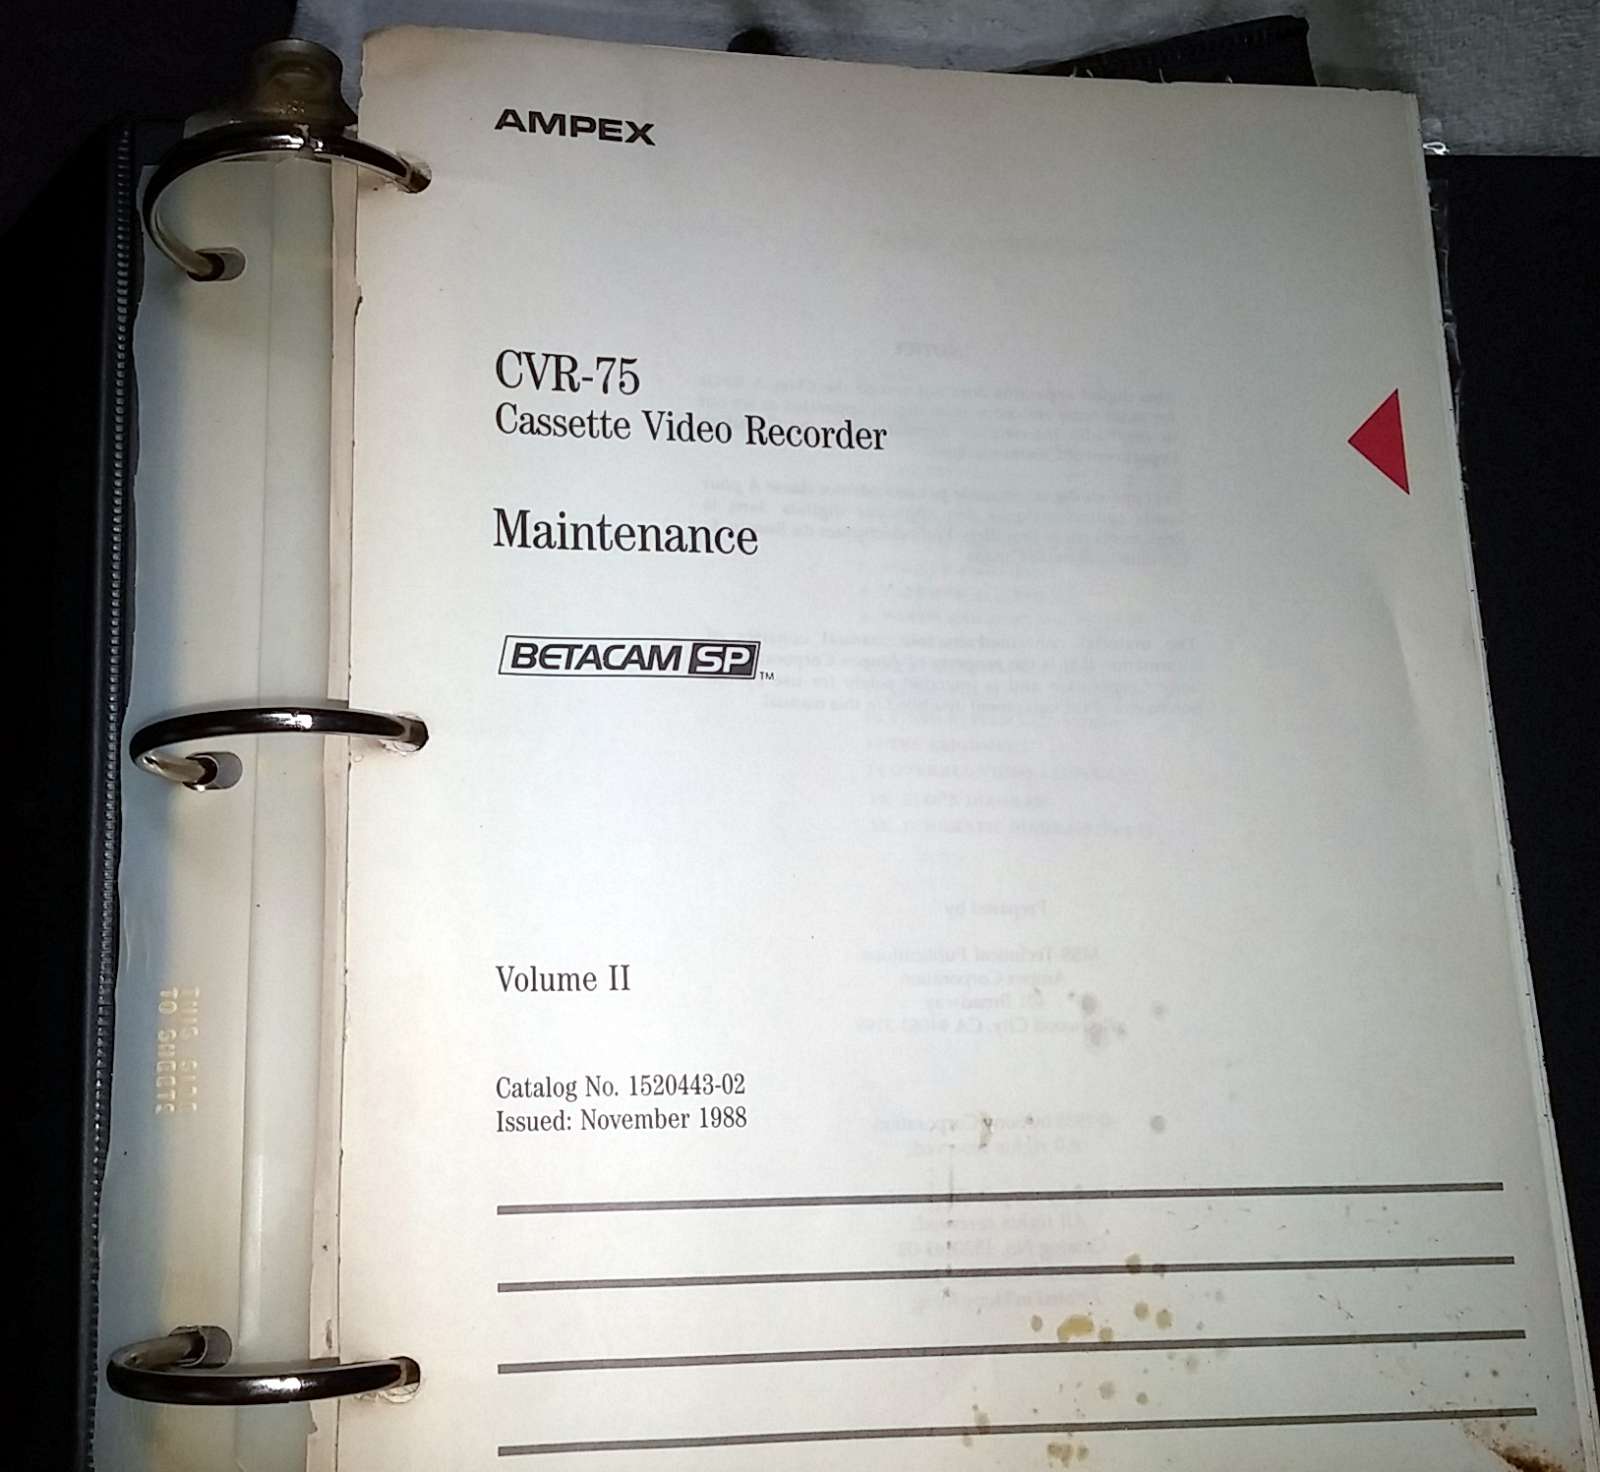 Service Manual for the CVR-75 and BVW-75 ampex betacam sp sony betacam sp 1/2 inch tape video tape professional video tape bvw-75 cvr-75 bvw75 cvr75 